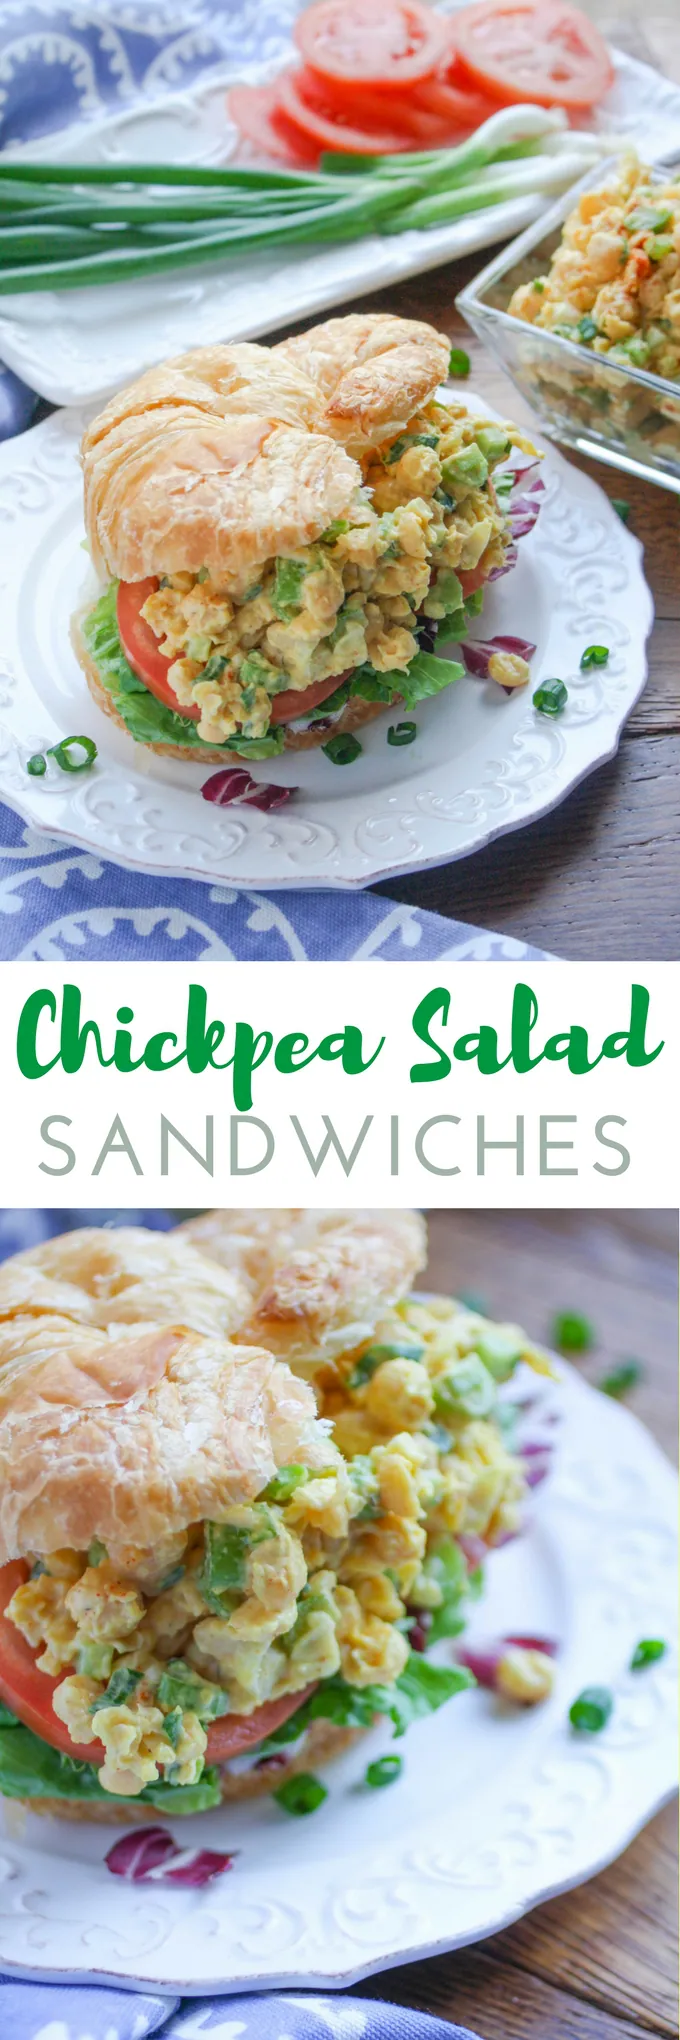 Chickpea Salad Sandwiches are a fabulous vegetarian sandwich great for any meal. You'll love these sandwiches for their big flavor!